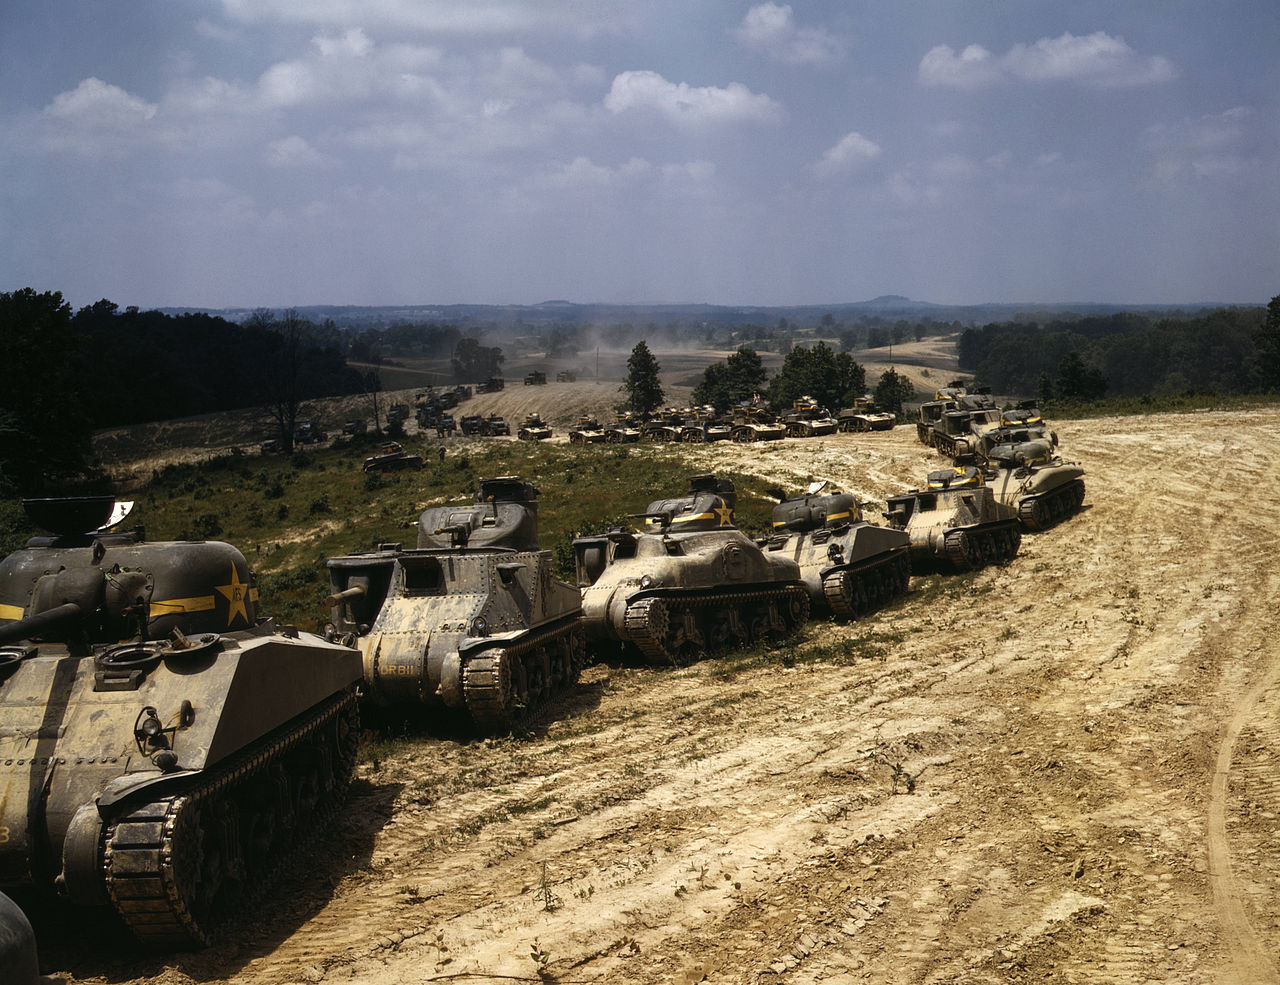 Parade of M-4 (General Sherman) and M-3 (General Grant) tanks in training maneuvers, Ft. Knox, Ky,1942